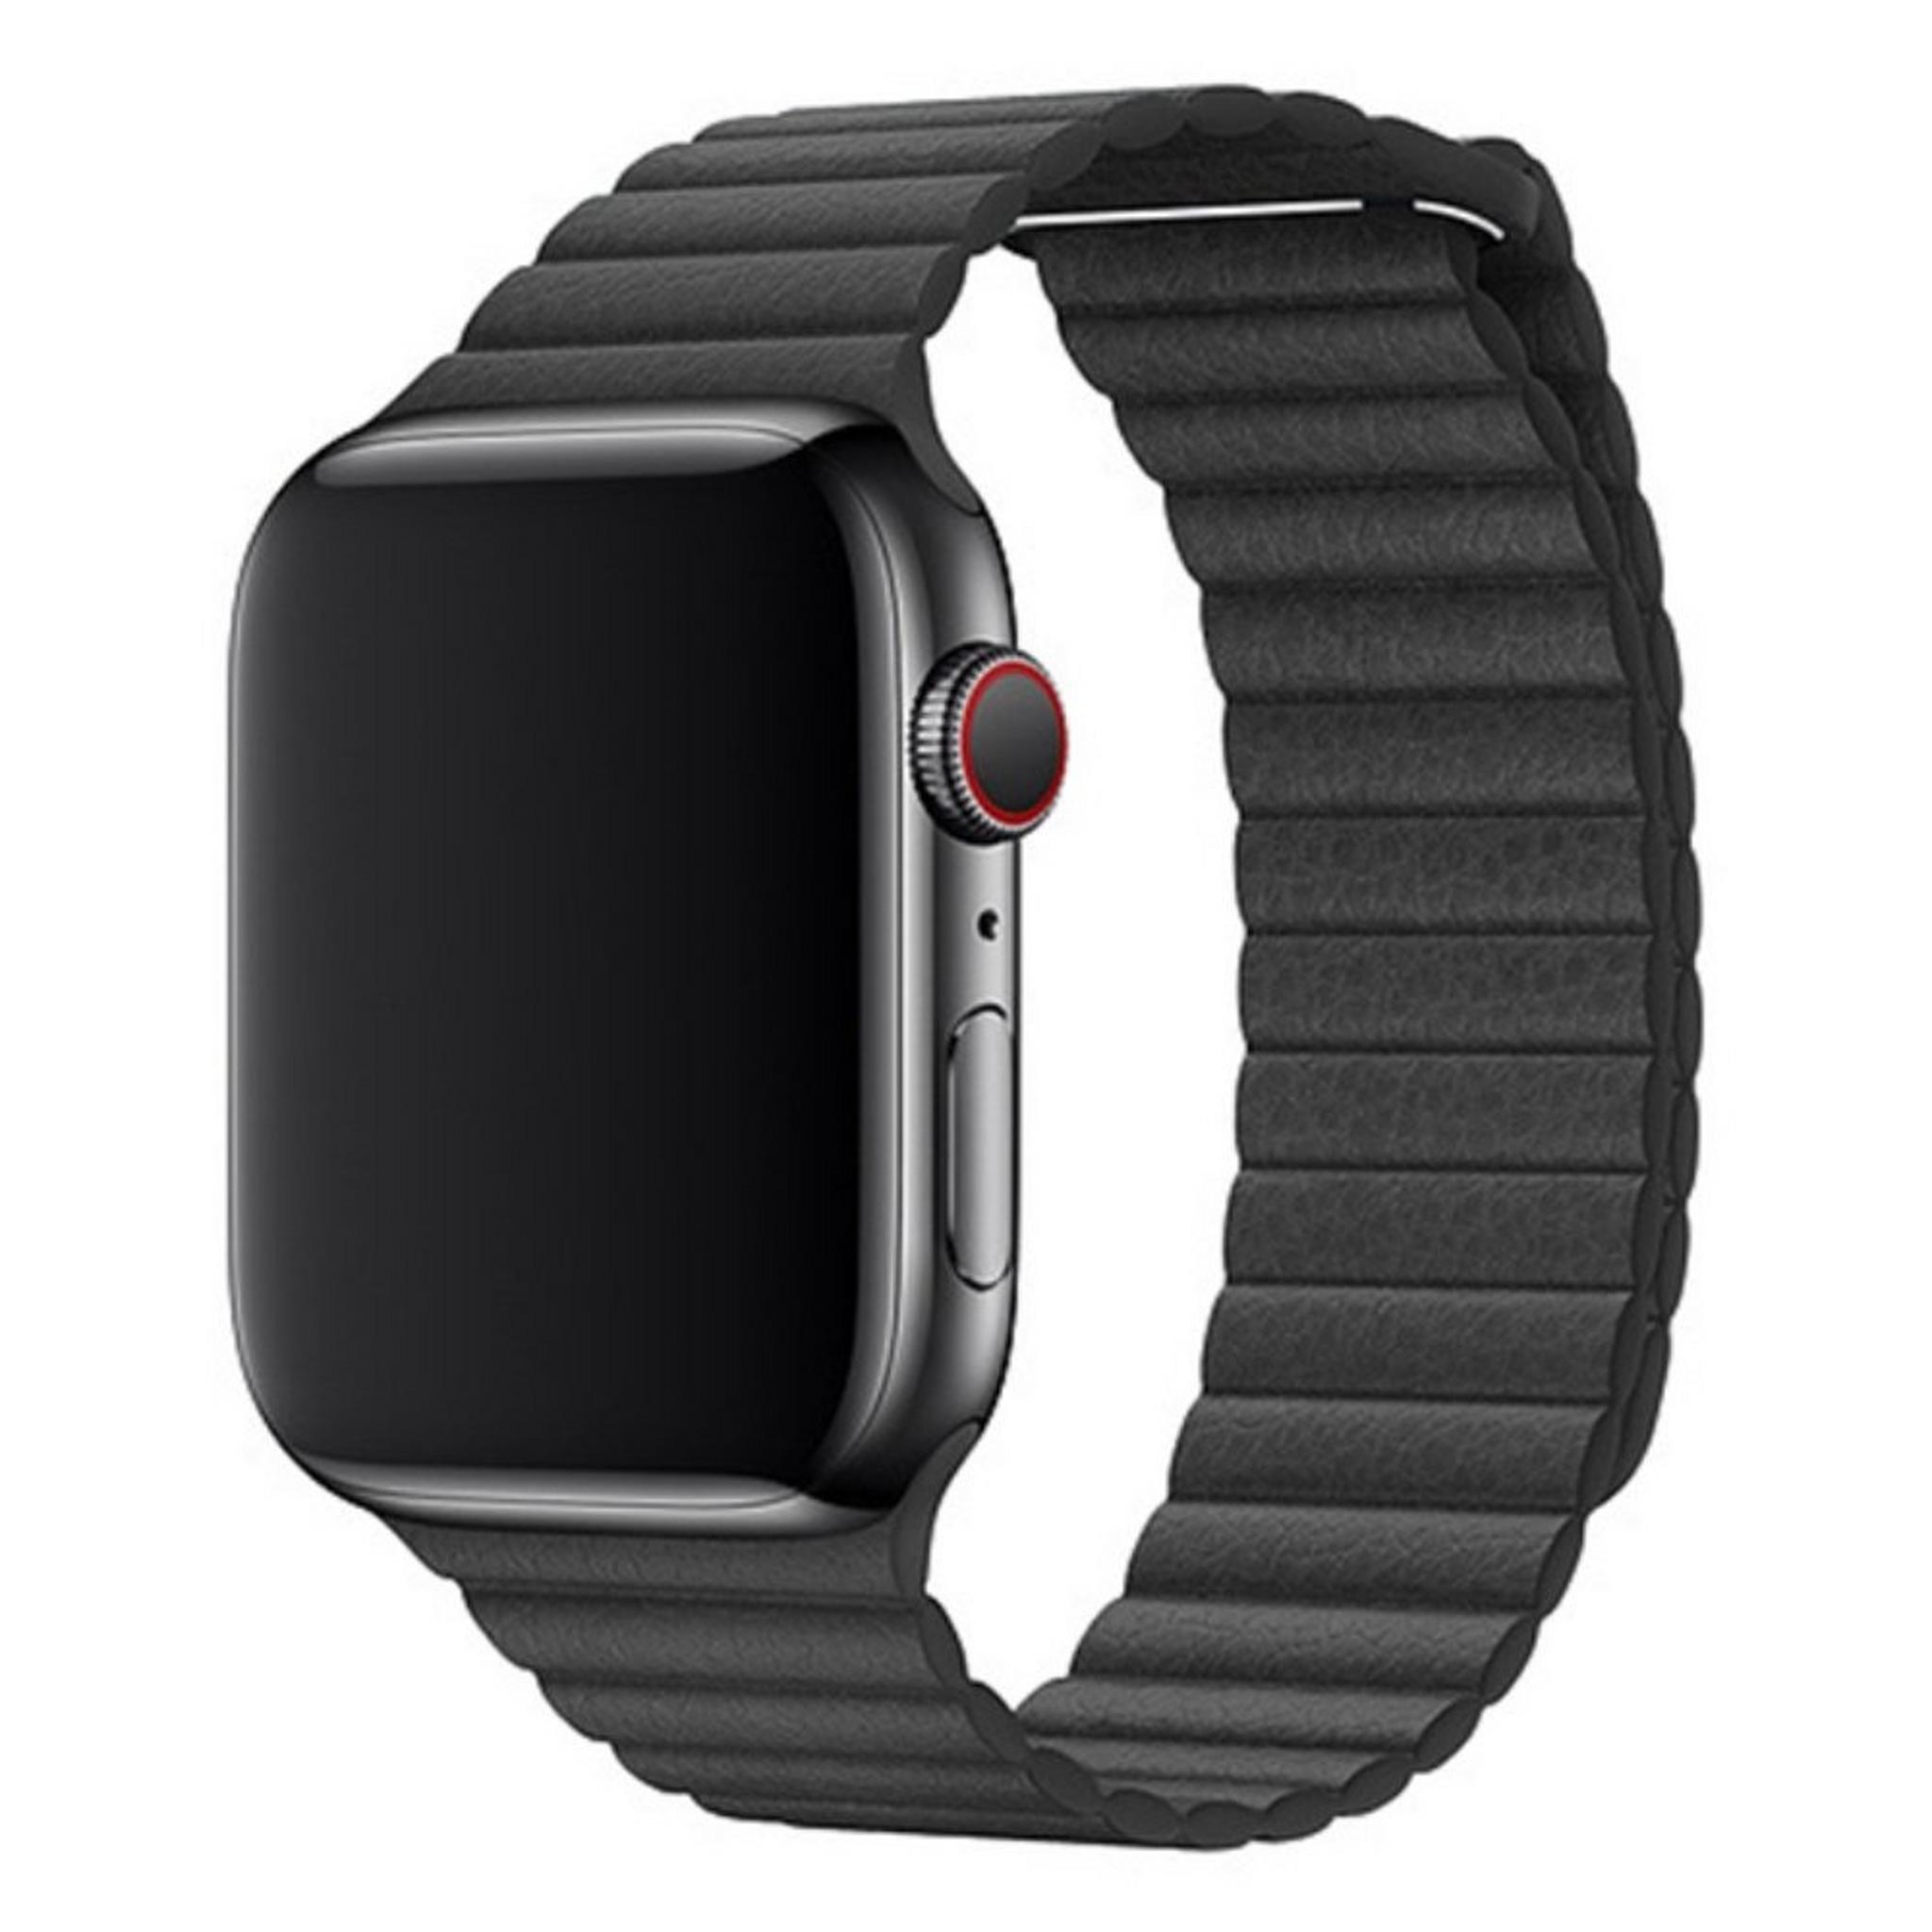 EQ Magnetic Leather Strap For Apple Watch 41mm - Black